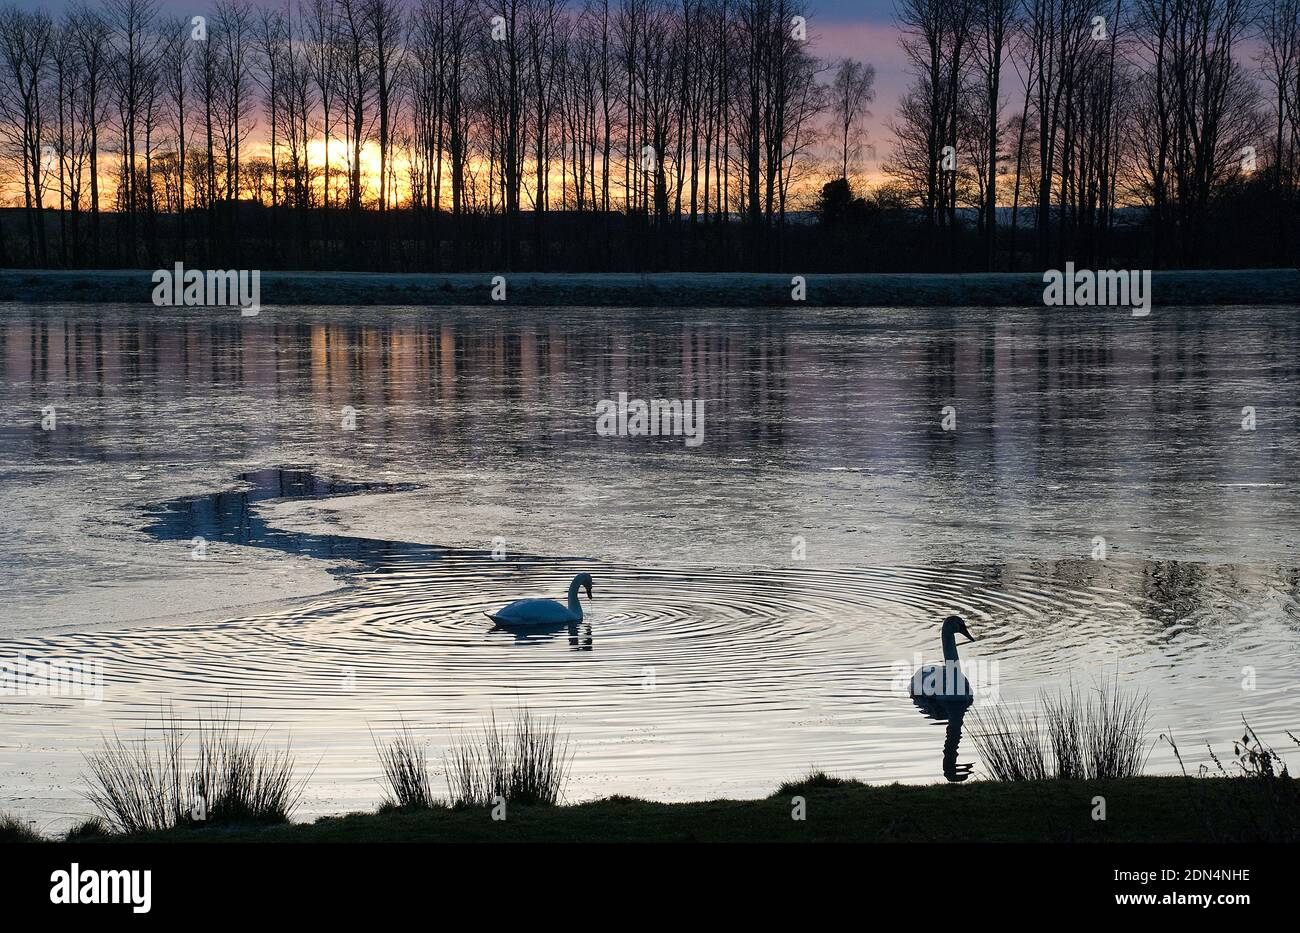 Wintry scene of two swans in the foreground on a partially ice covered lake set against a backdrop of trees caught in silhouette by the setting sun Stock Photo